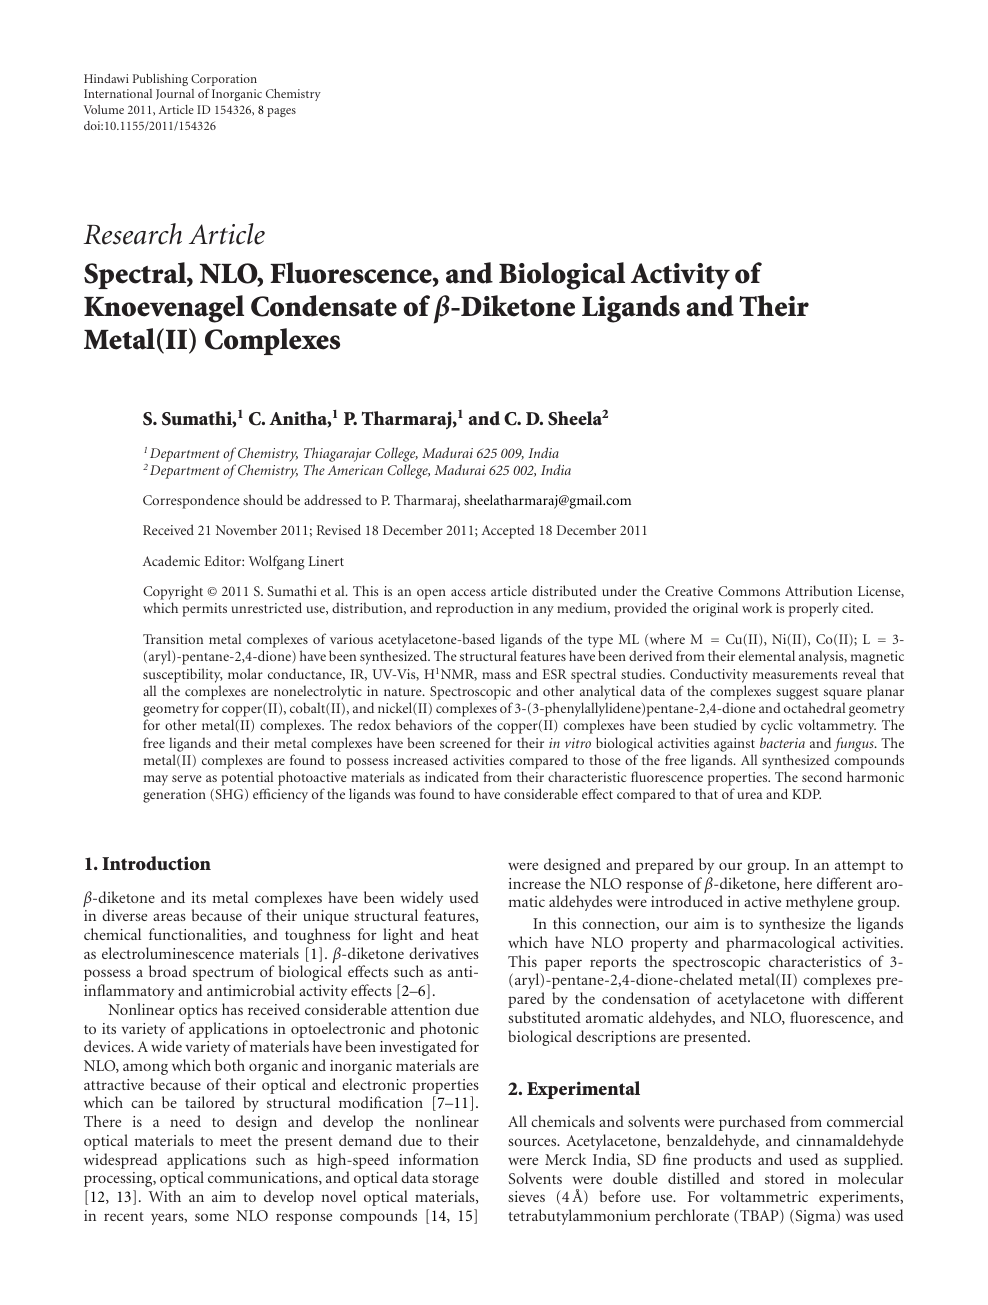 Spectral Nlo Fluorescence And Biological Activity Of Knoevenagel Condensate Of B Diketone Ligands And Their Metal Ii Complexes Topic Of Research Paper In Chemical Sciences Download Scholarly Article Pdf And Read For